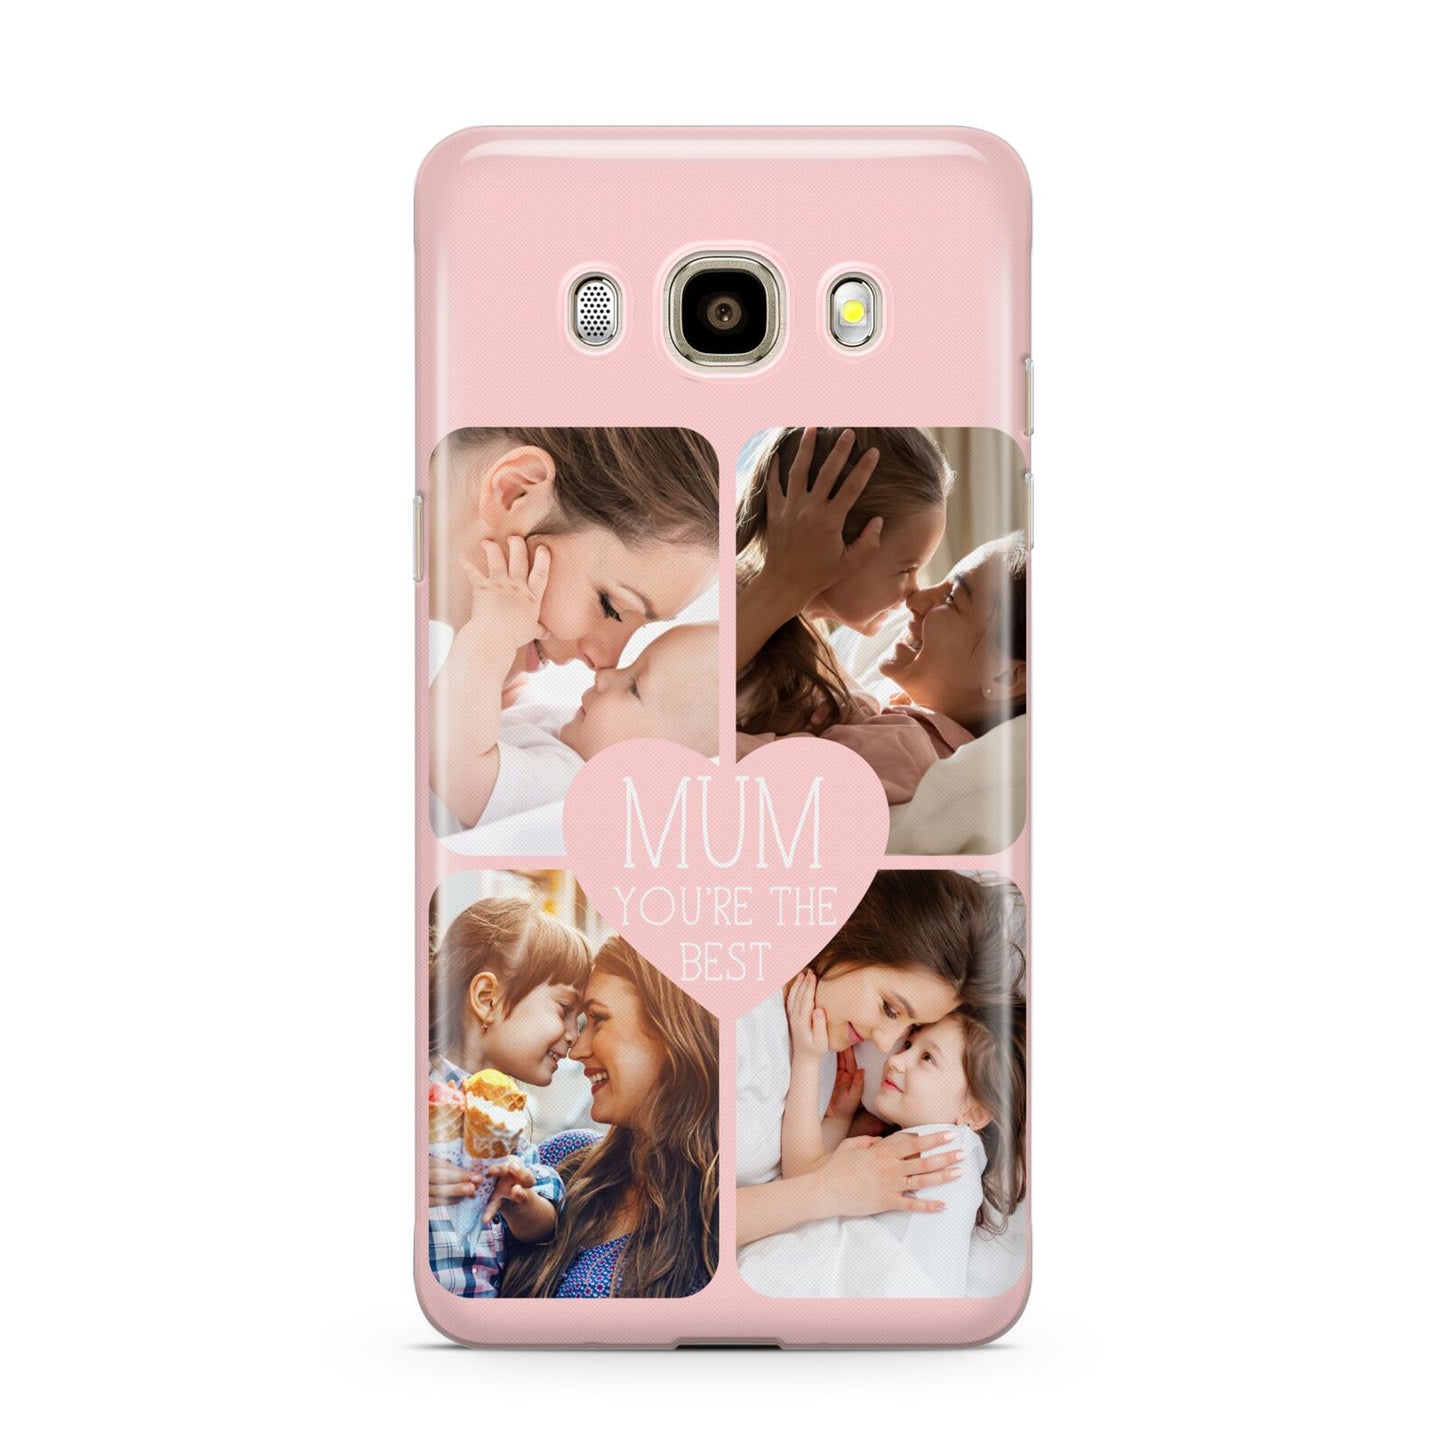 Mothers Day Four Photo Upload Samsung Galaxy J7 2016 Case on gold phone